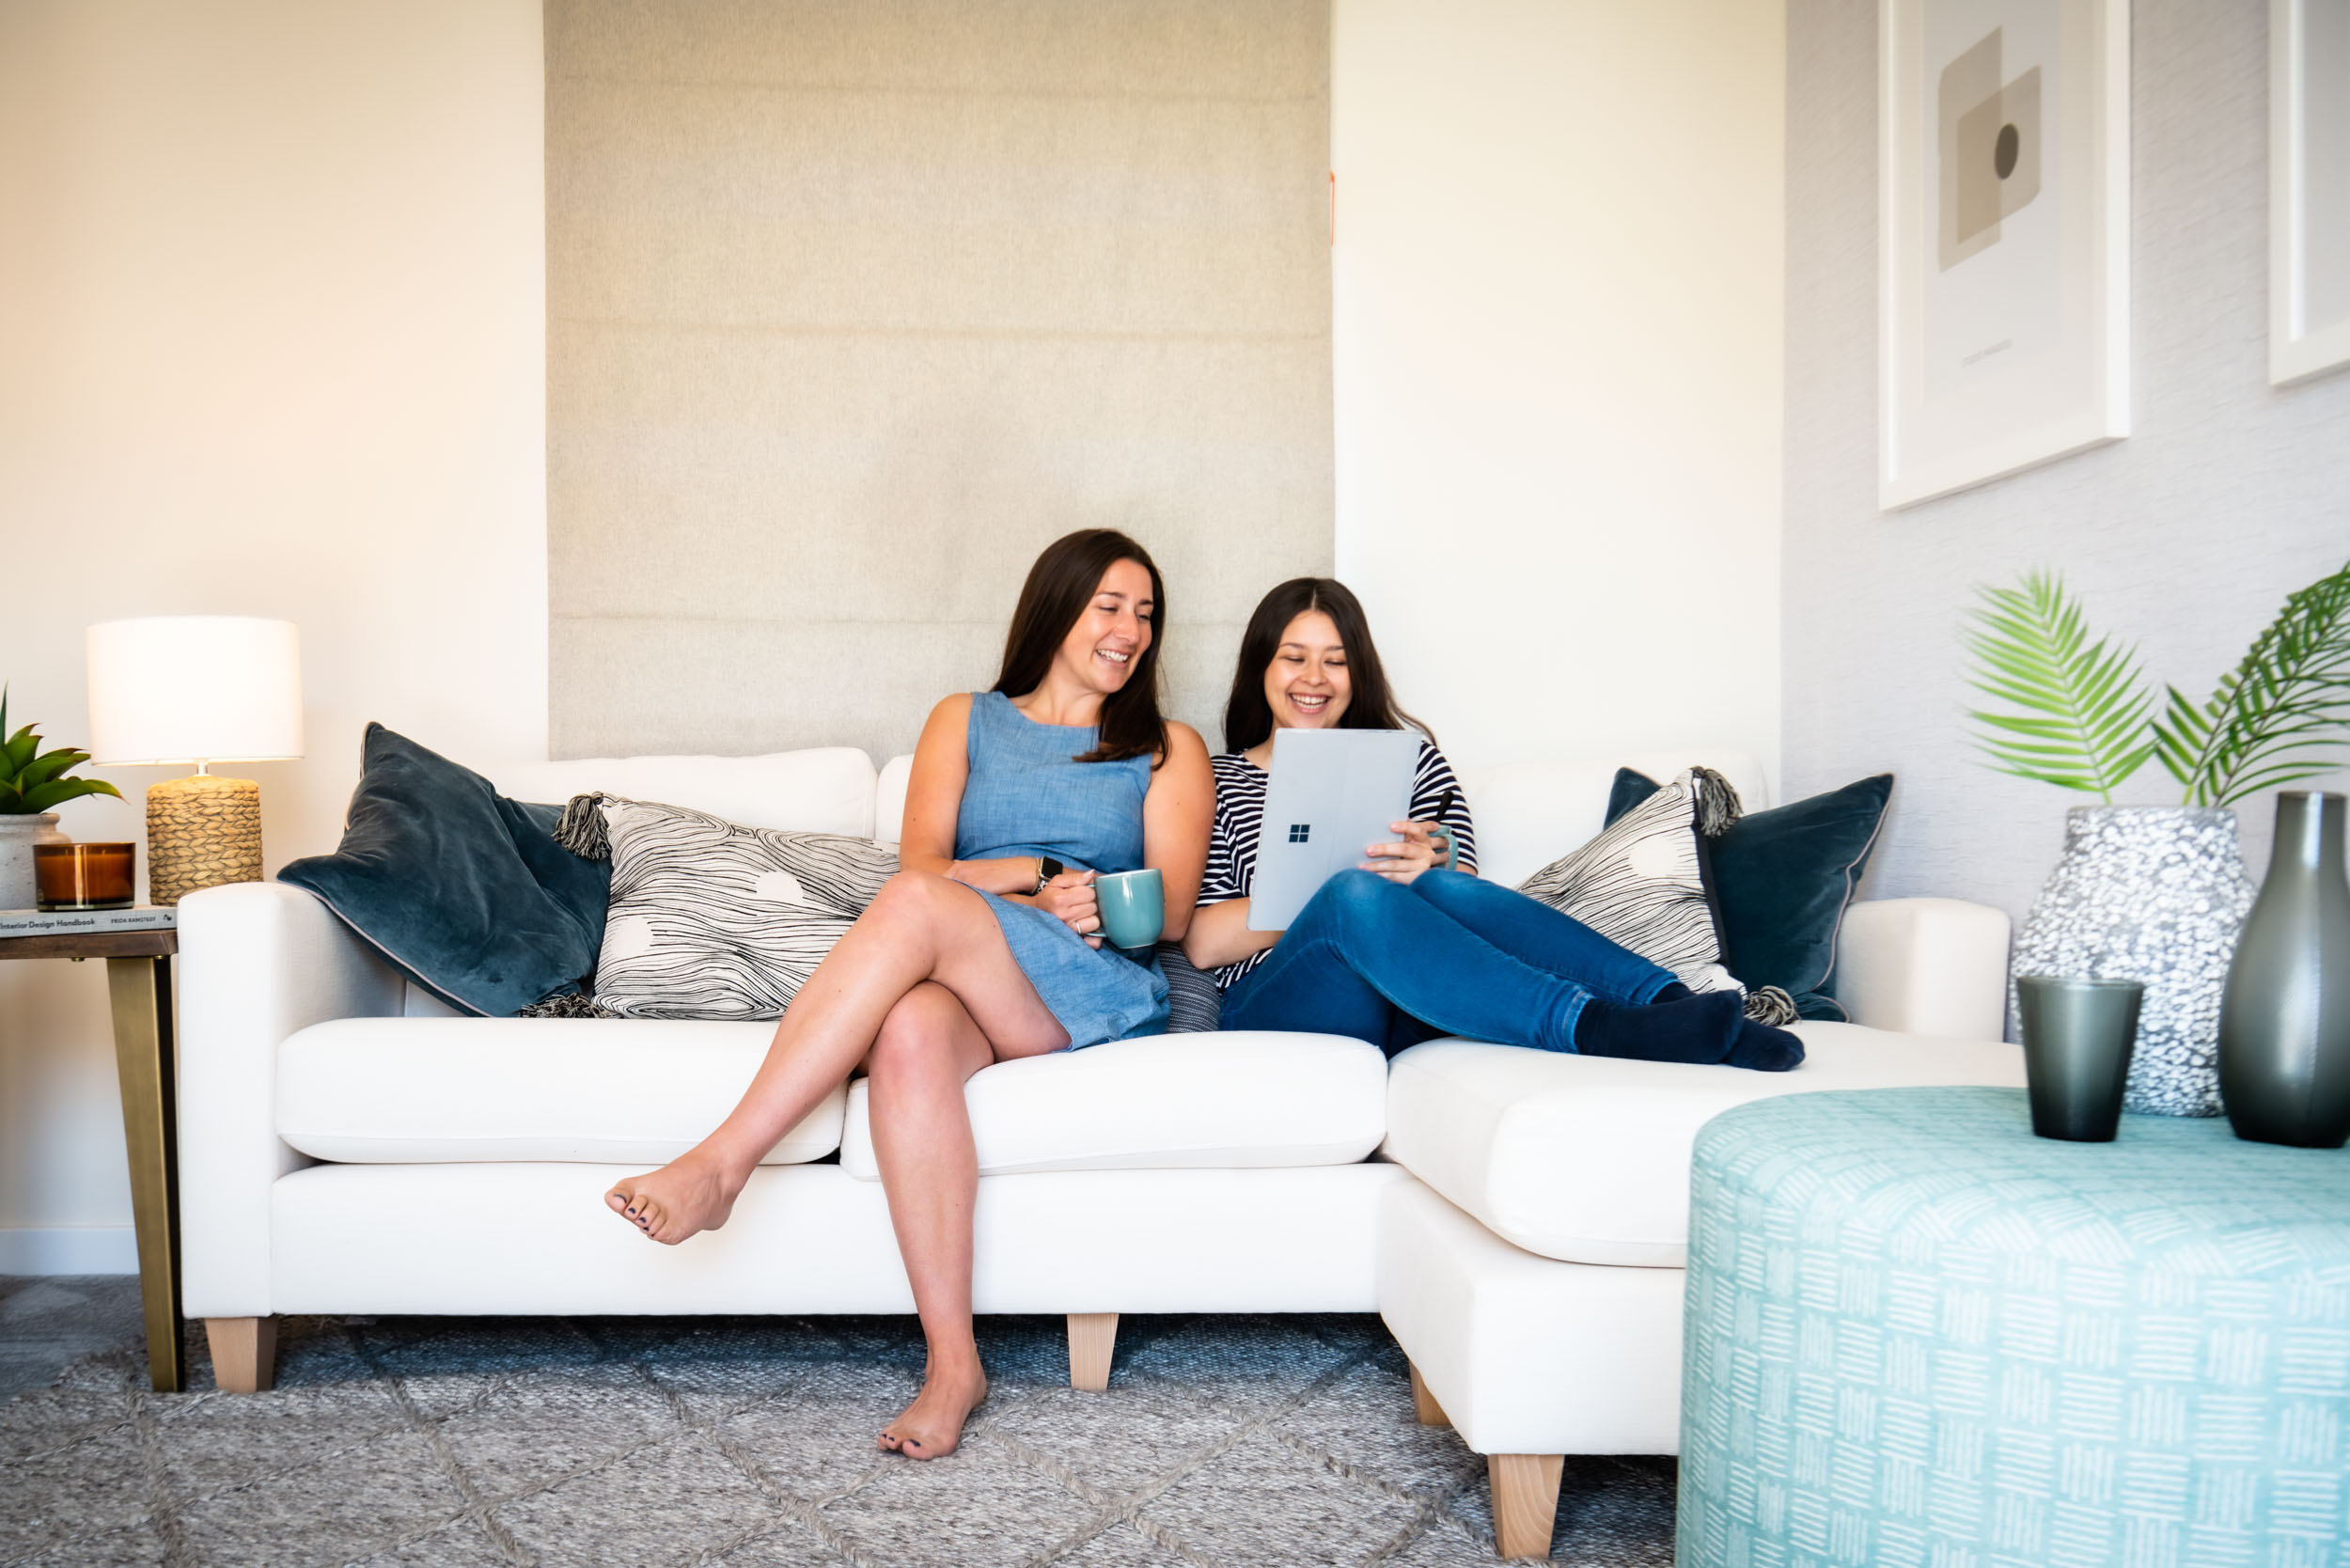 A lifestyle photo of a couple on a sofa. They are smiling and looking at a tablet together.